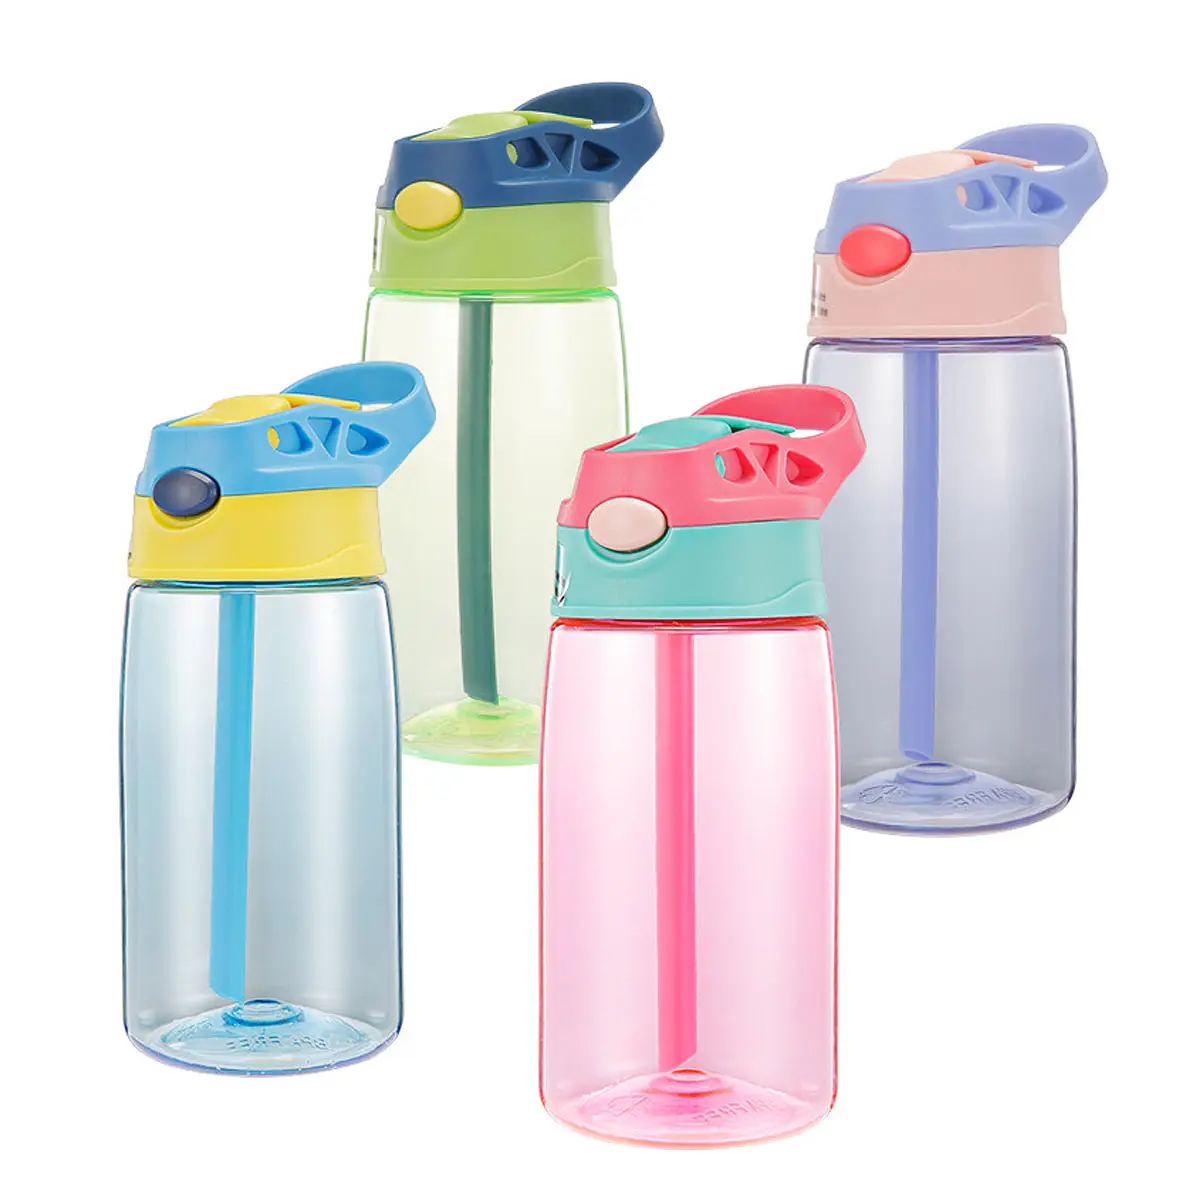 Best Selling Water Bottle Straw Cup Small Boy Creative Cartoon Water Bottles Fashion Water Bottle for Children